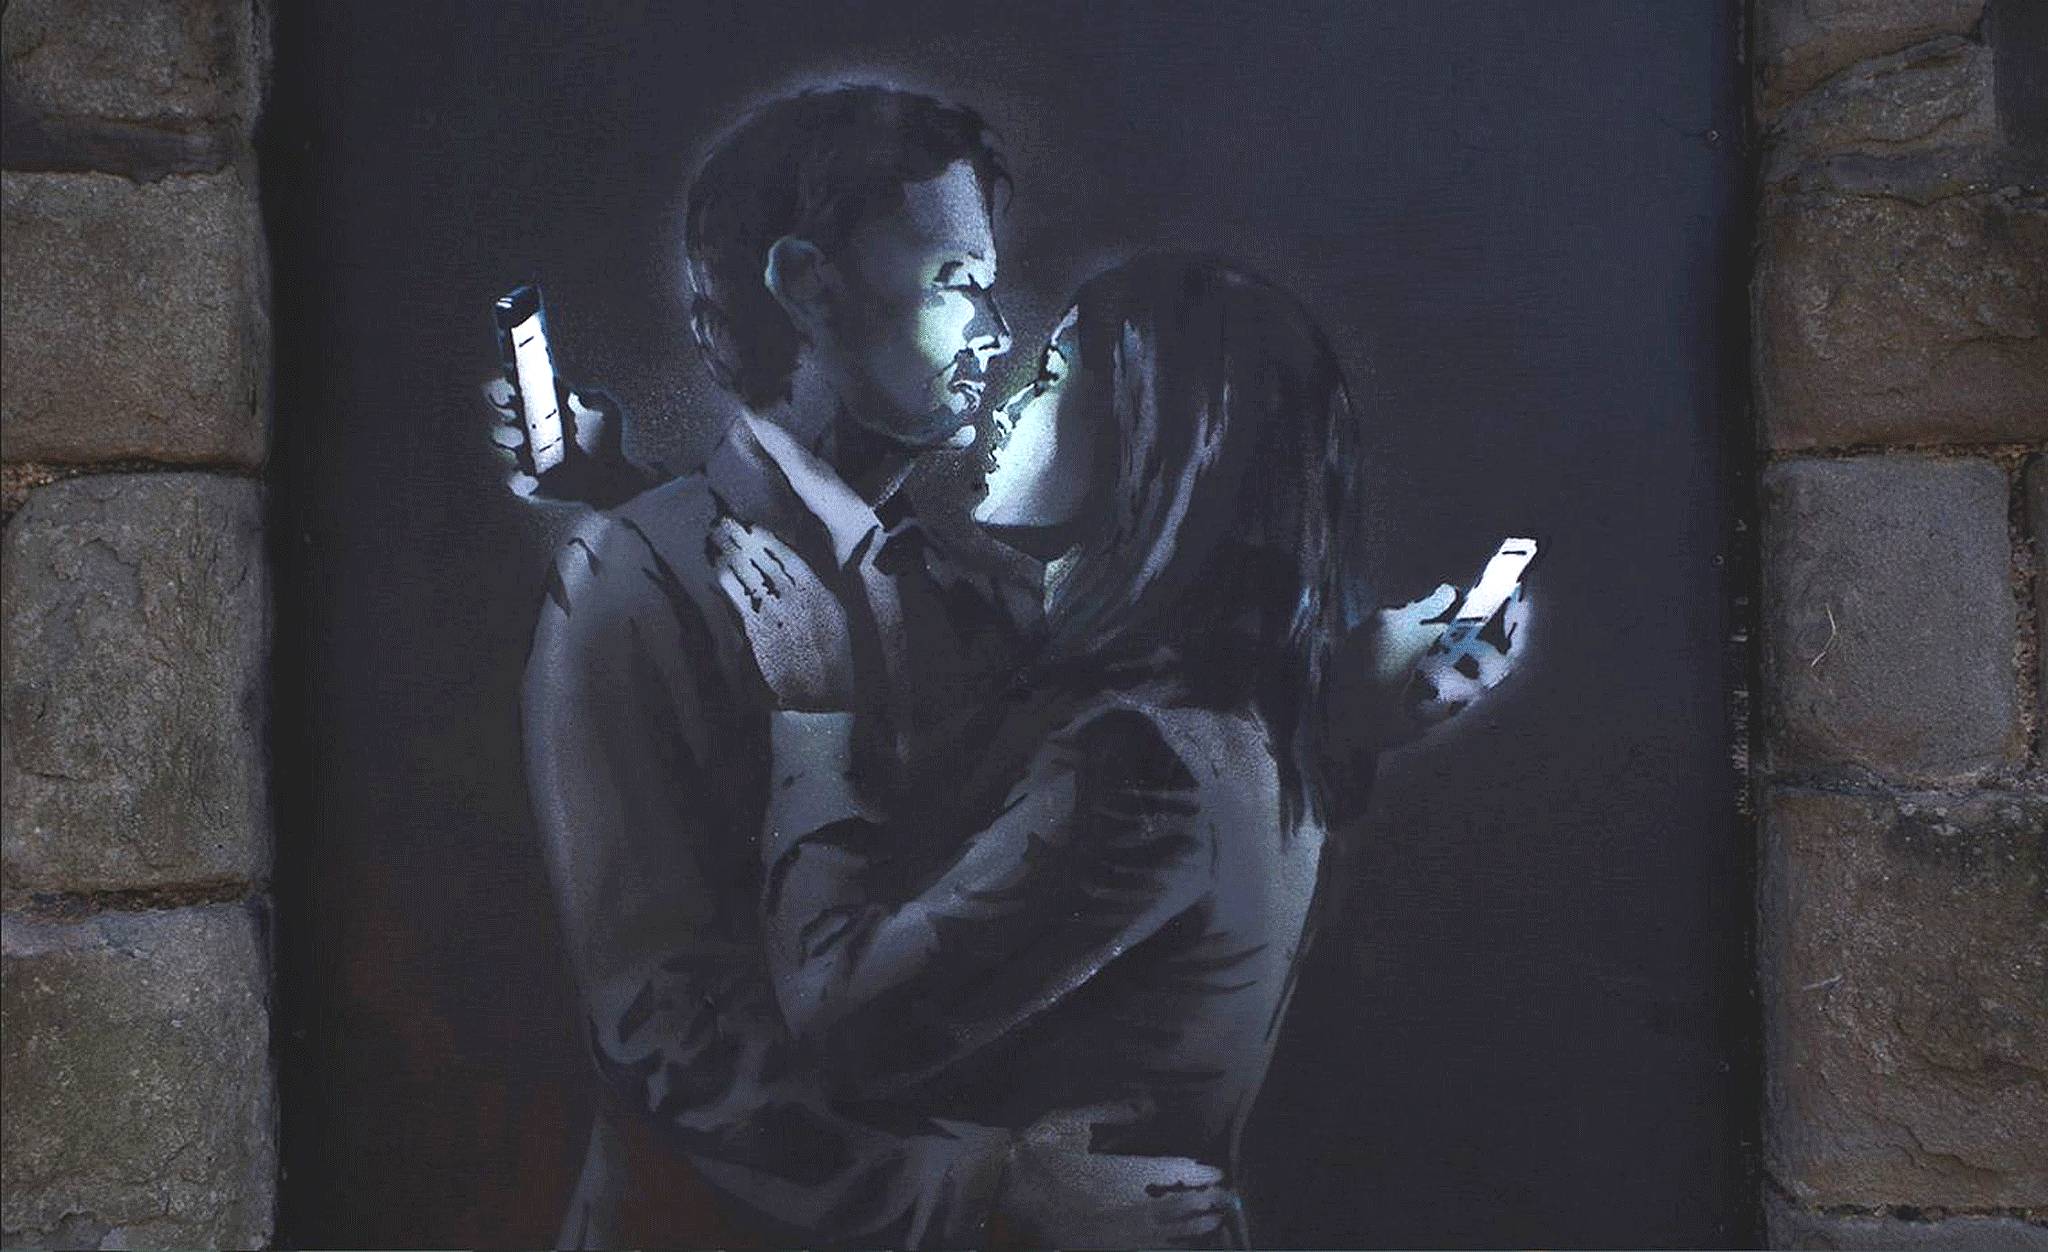 Art blogs have christened the work 'Mobile Lovers'